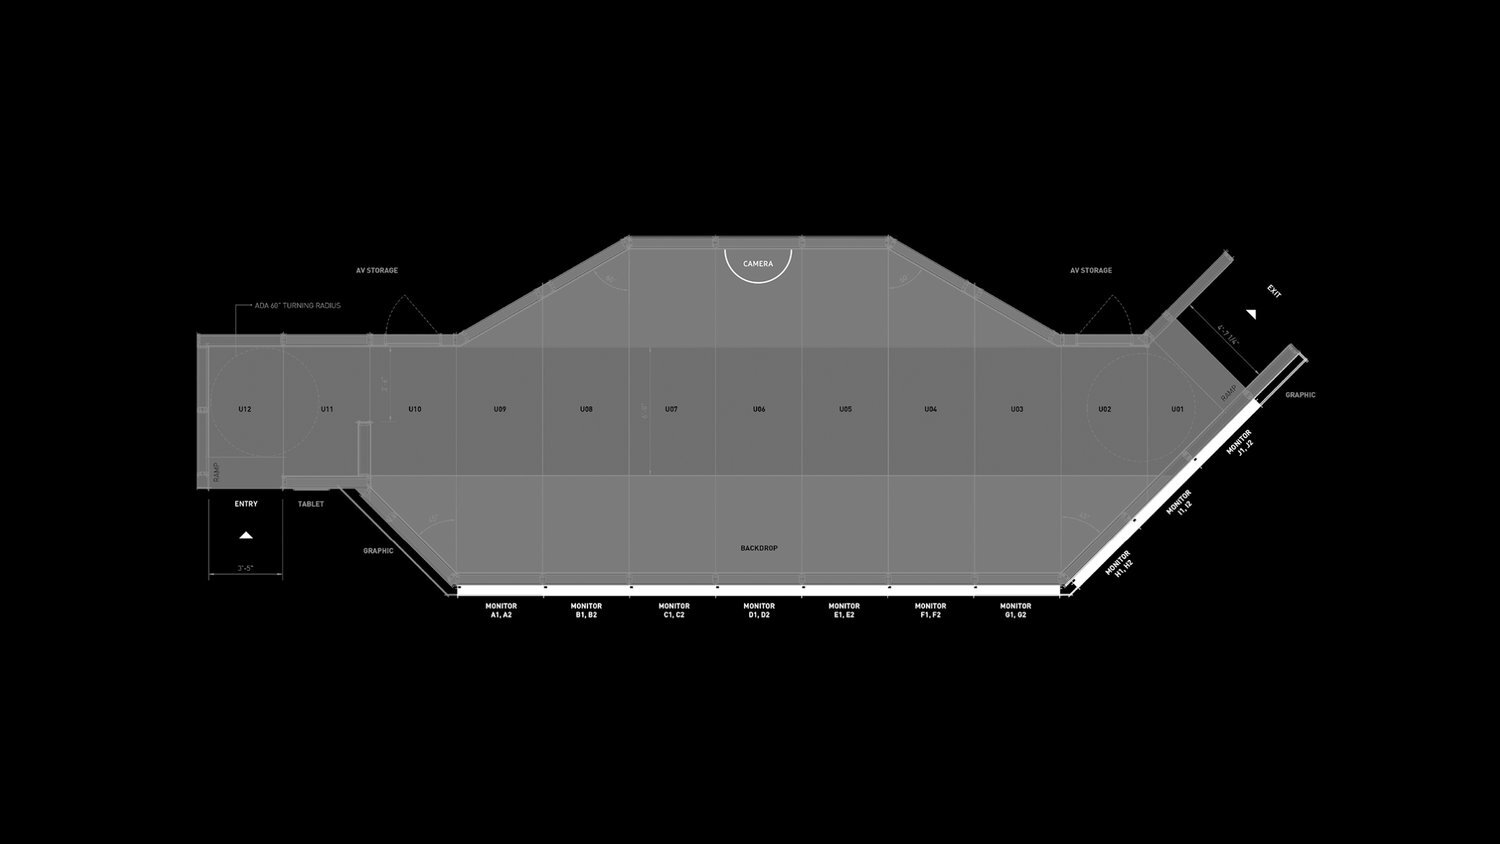 The floorplan for the Samsung Hu experience.